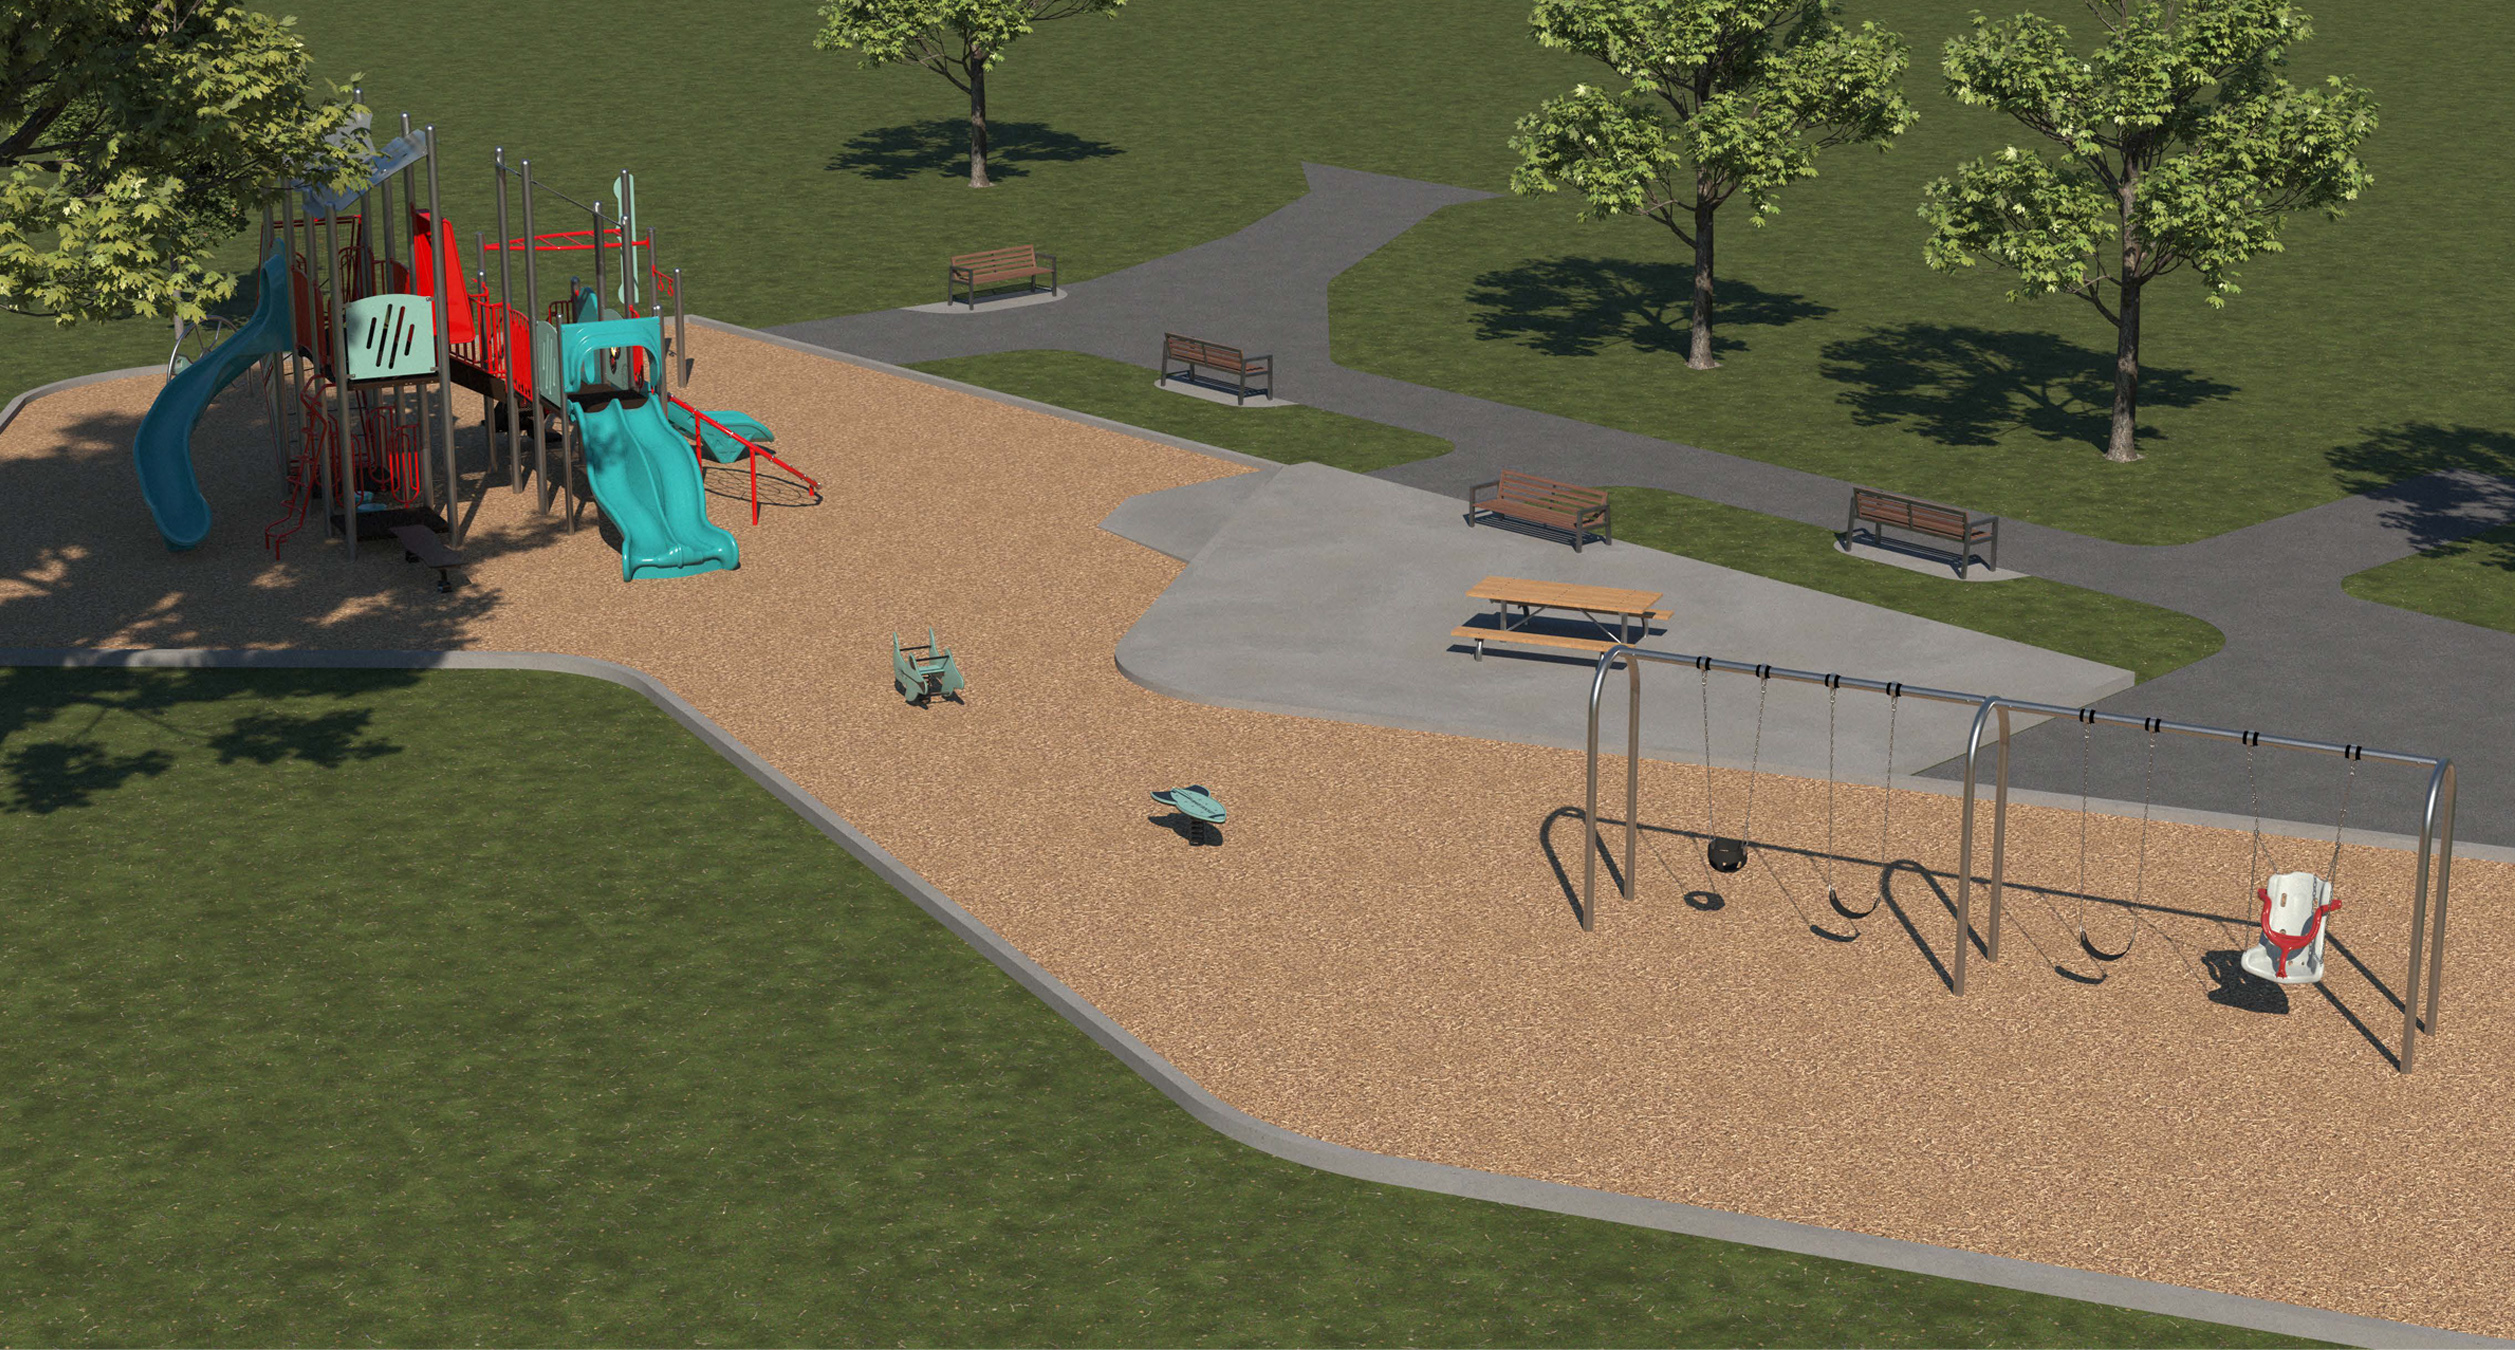 A rendering of playground Design B. From left to right, combined play structure, sit-down toy, surfboard motion toy, swings. Climbing equipment and a picnic table are also displayed. Design is further described following the image.